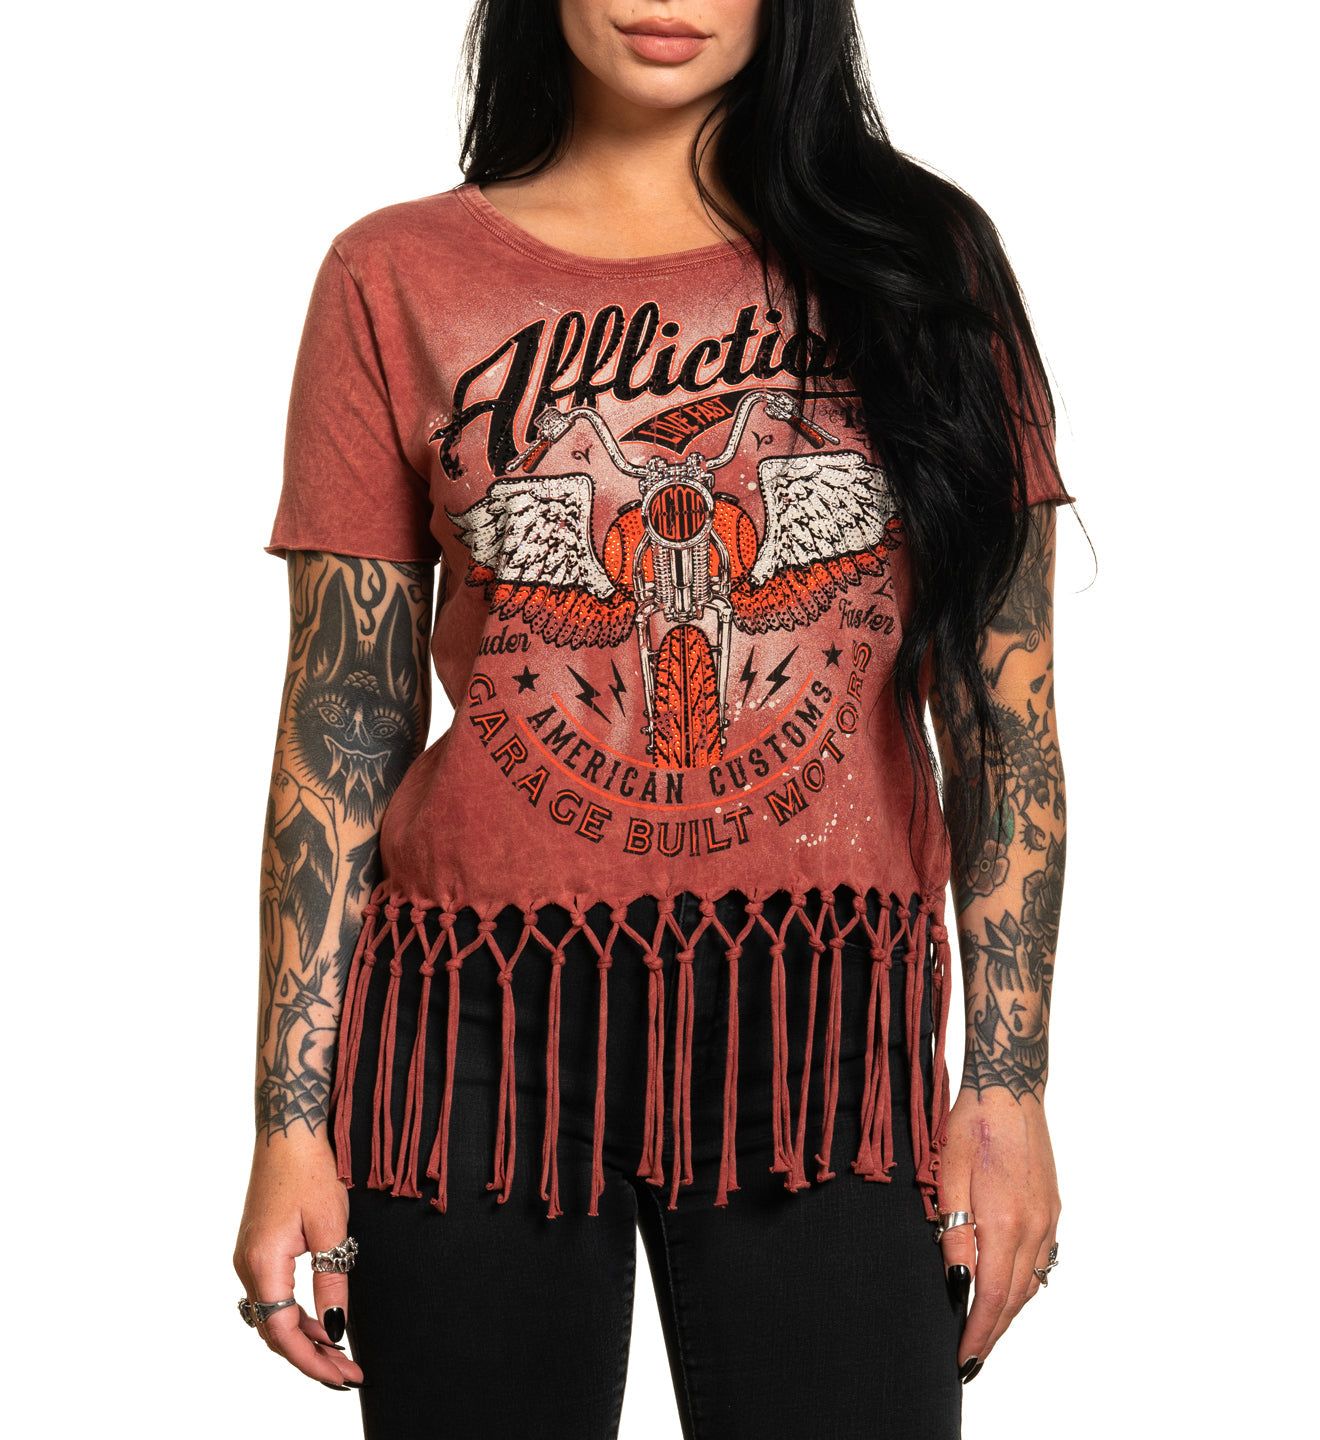 AC Built For Speed - Affliction Clothing